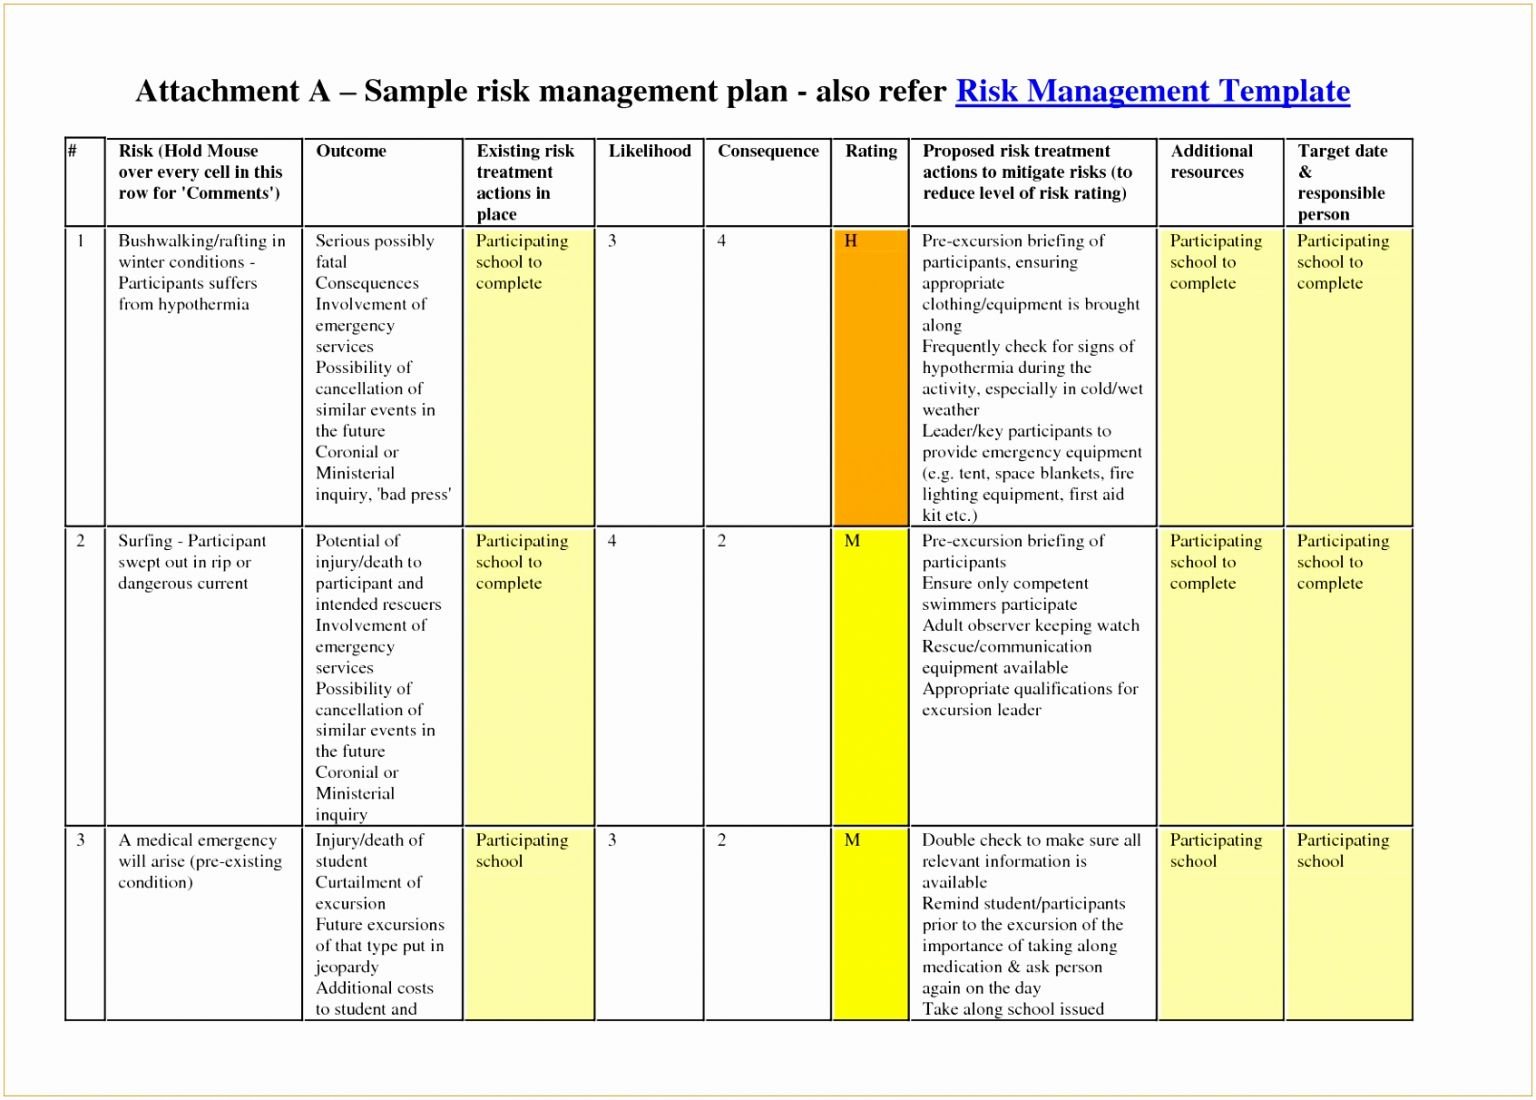 research project risk assessment example